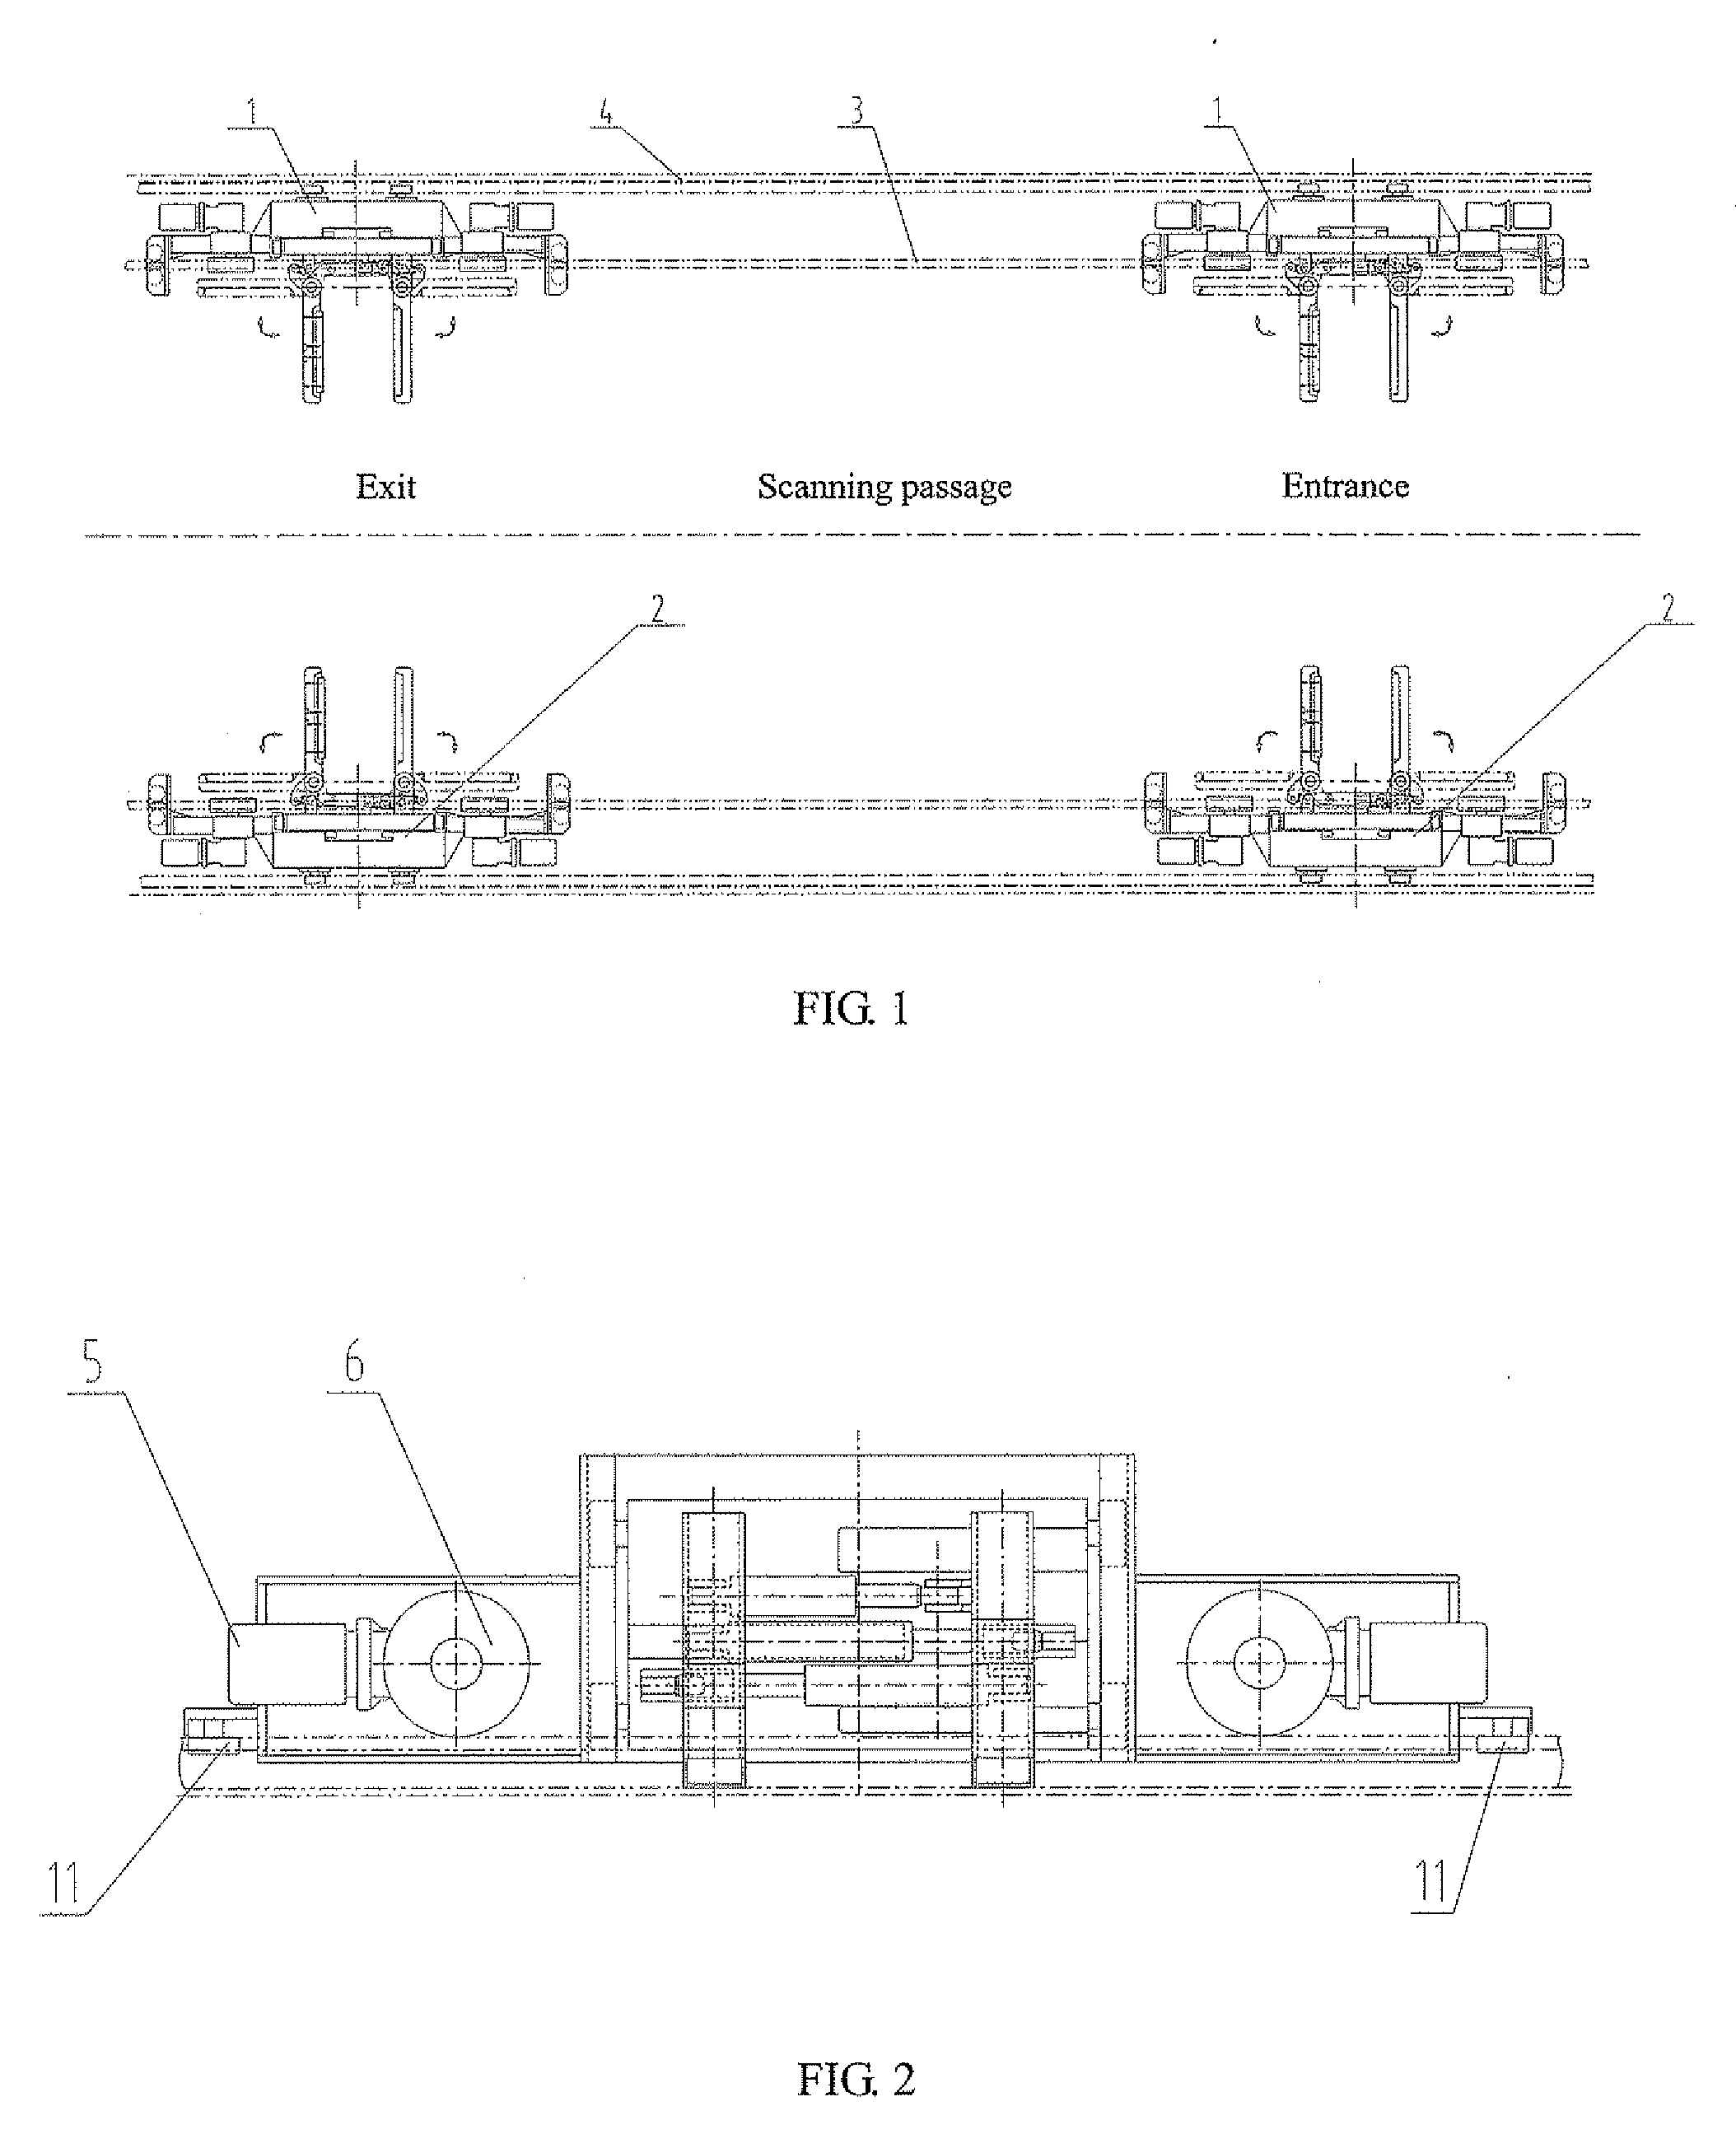 Trailer system and method for inspecting vehicle by radiation imaging of vehicle through trailer system